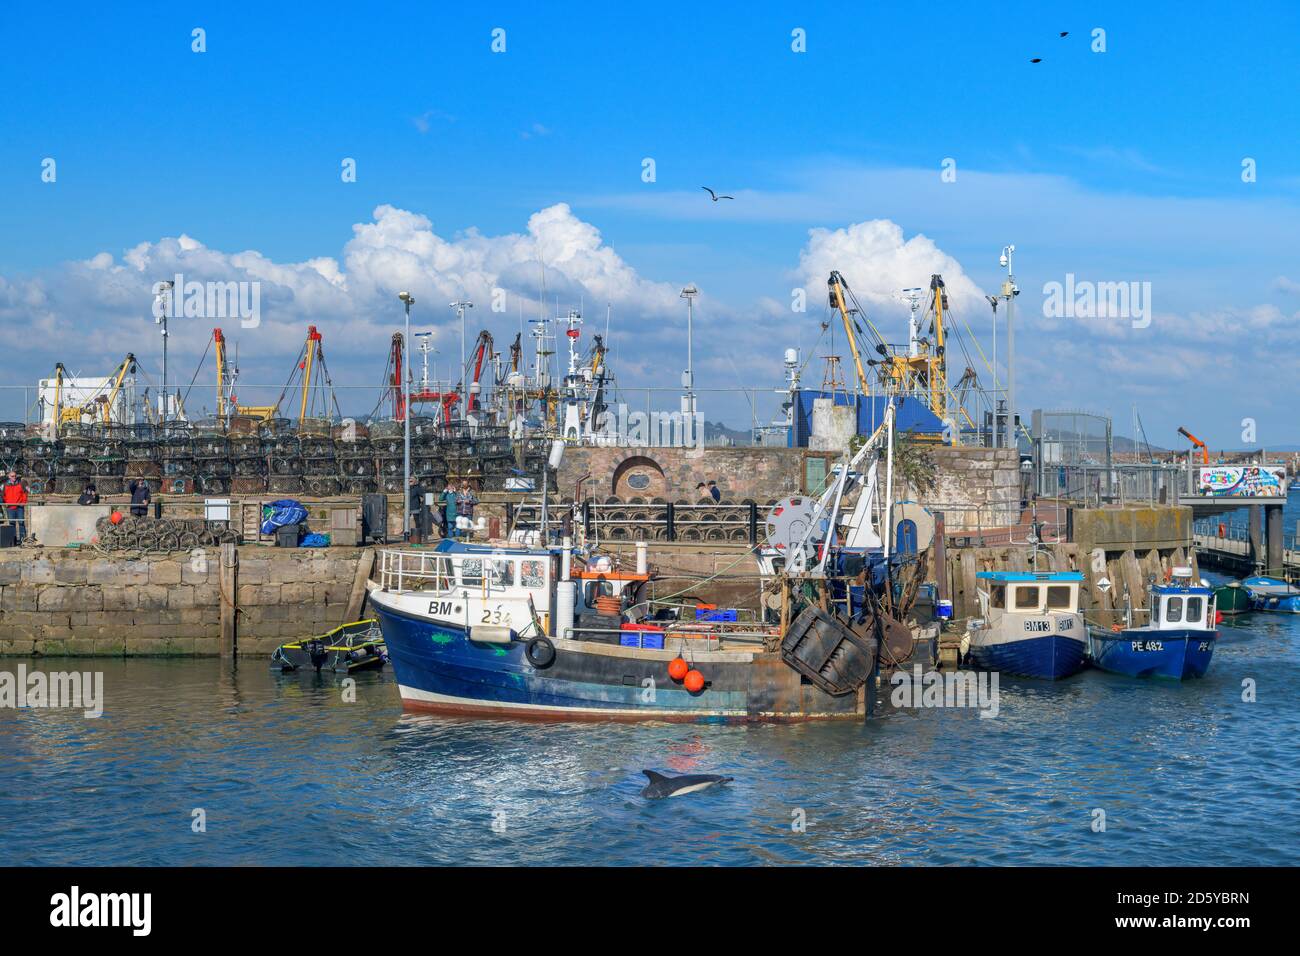 Wednesday 14th October 2020. Brixham, South Devon, England. On a beautiful sunny, but breezy afternoon in South Devon, a dolphin puts on a show for the late holidaymakers at the picturesque fishing town of Brixham. Credit: Terry Mathews/Alamy Live News Stock Photo